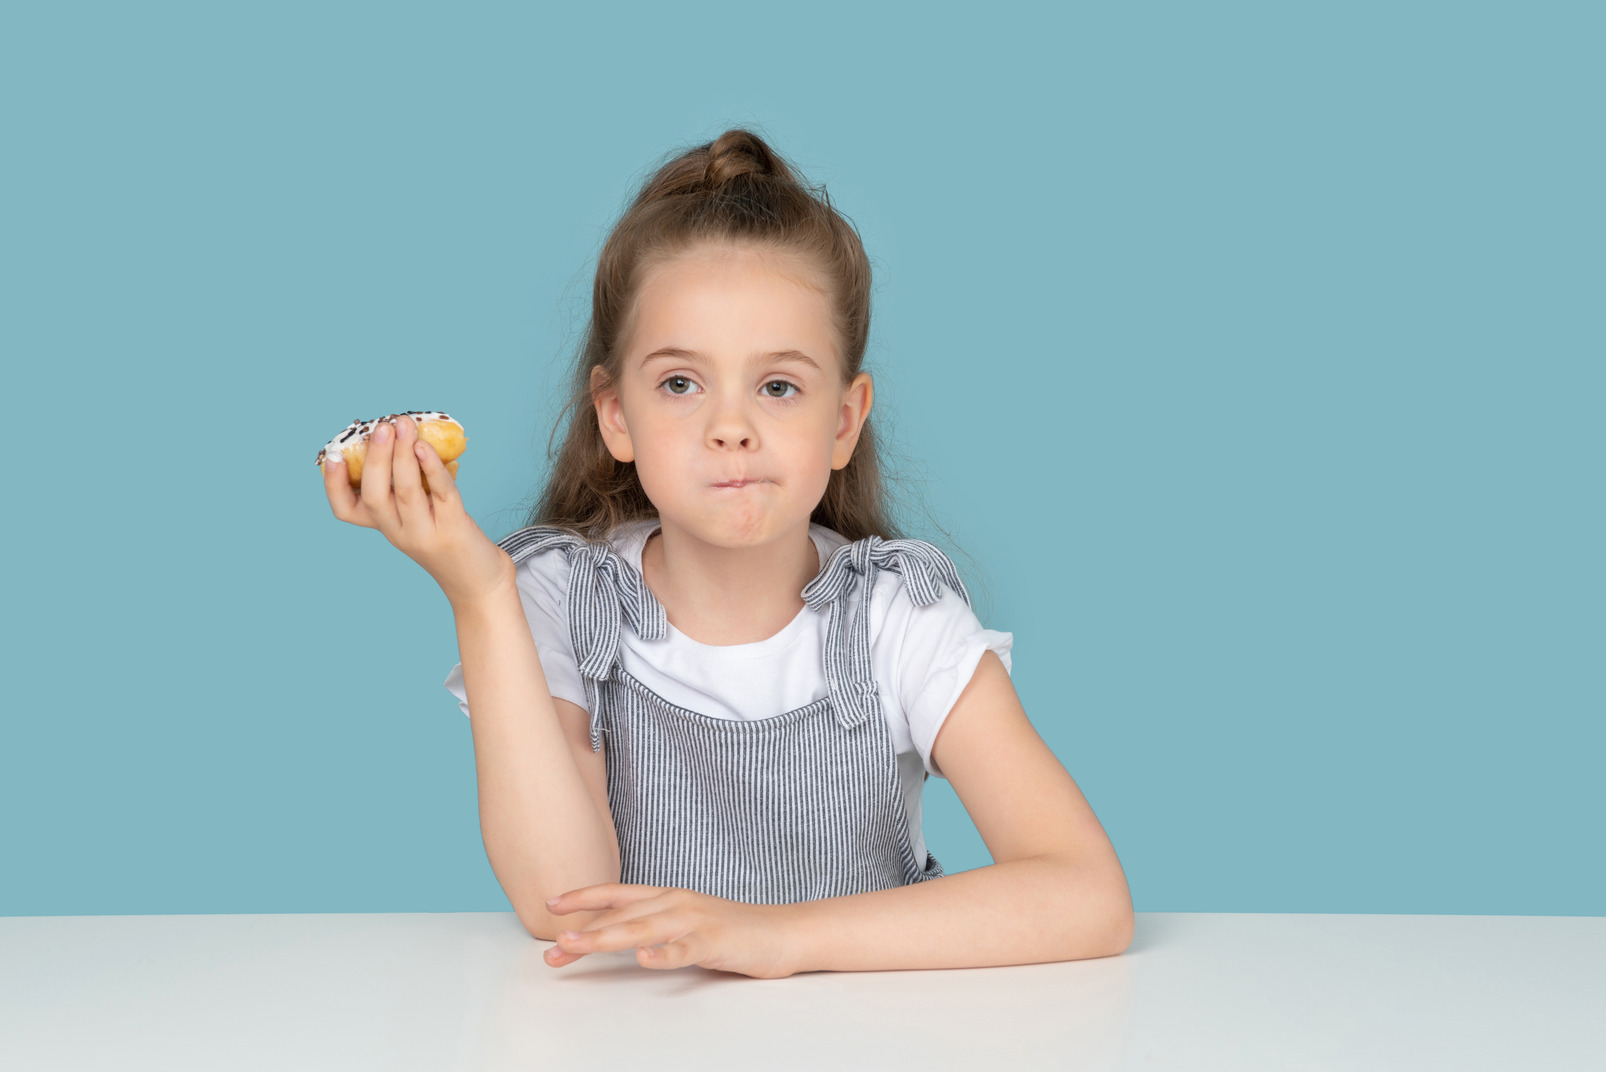 Cute little girl holding a doughnut and thinking